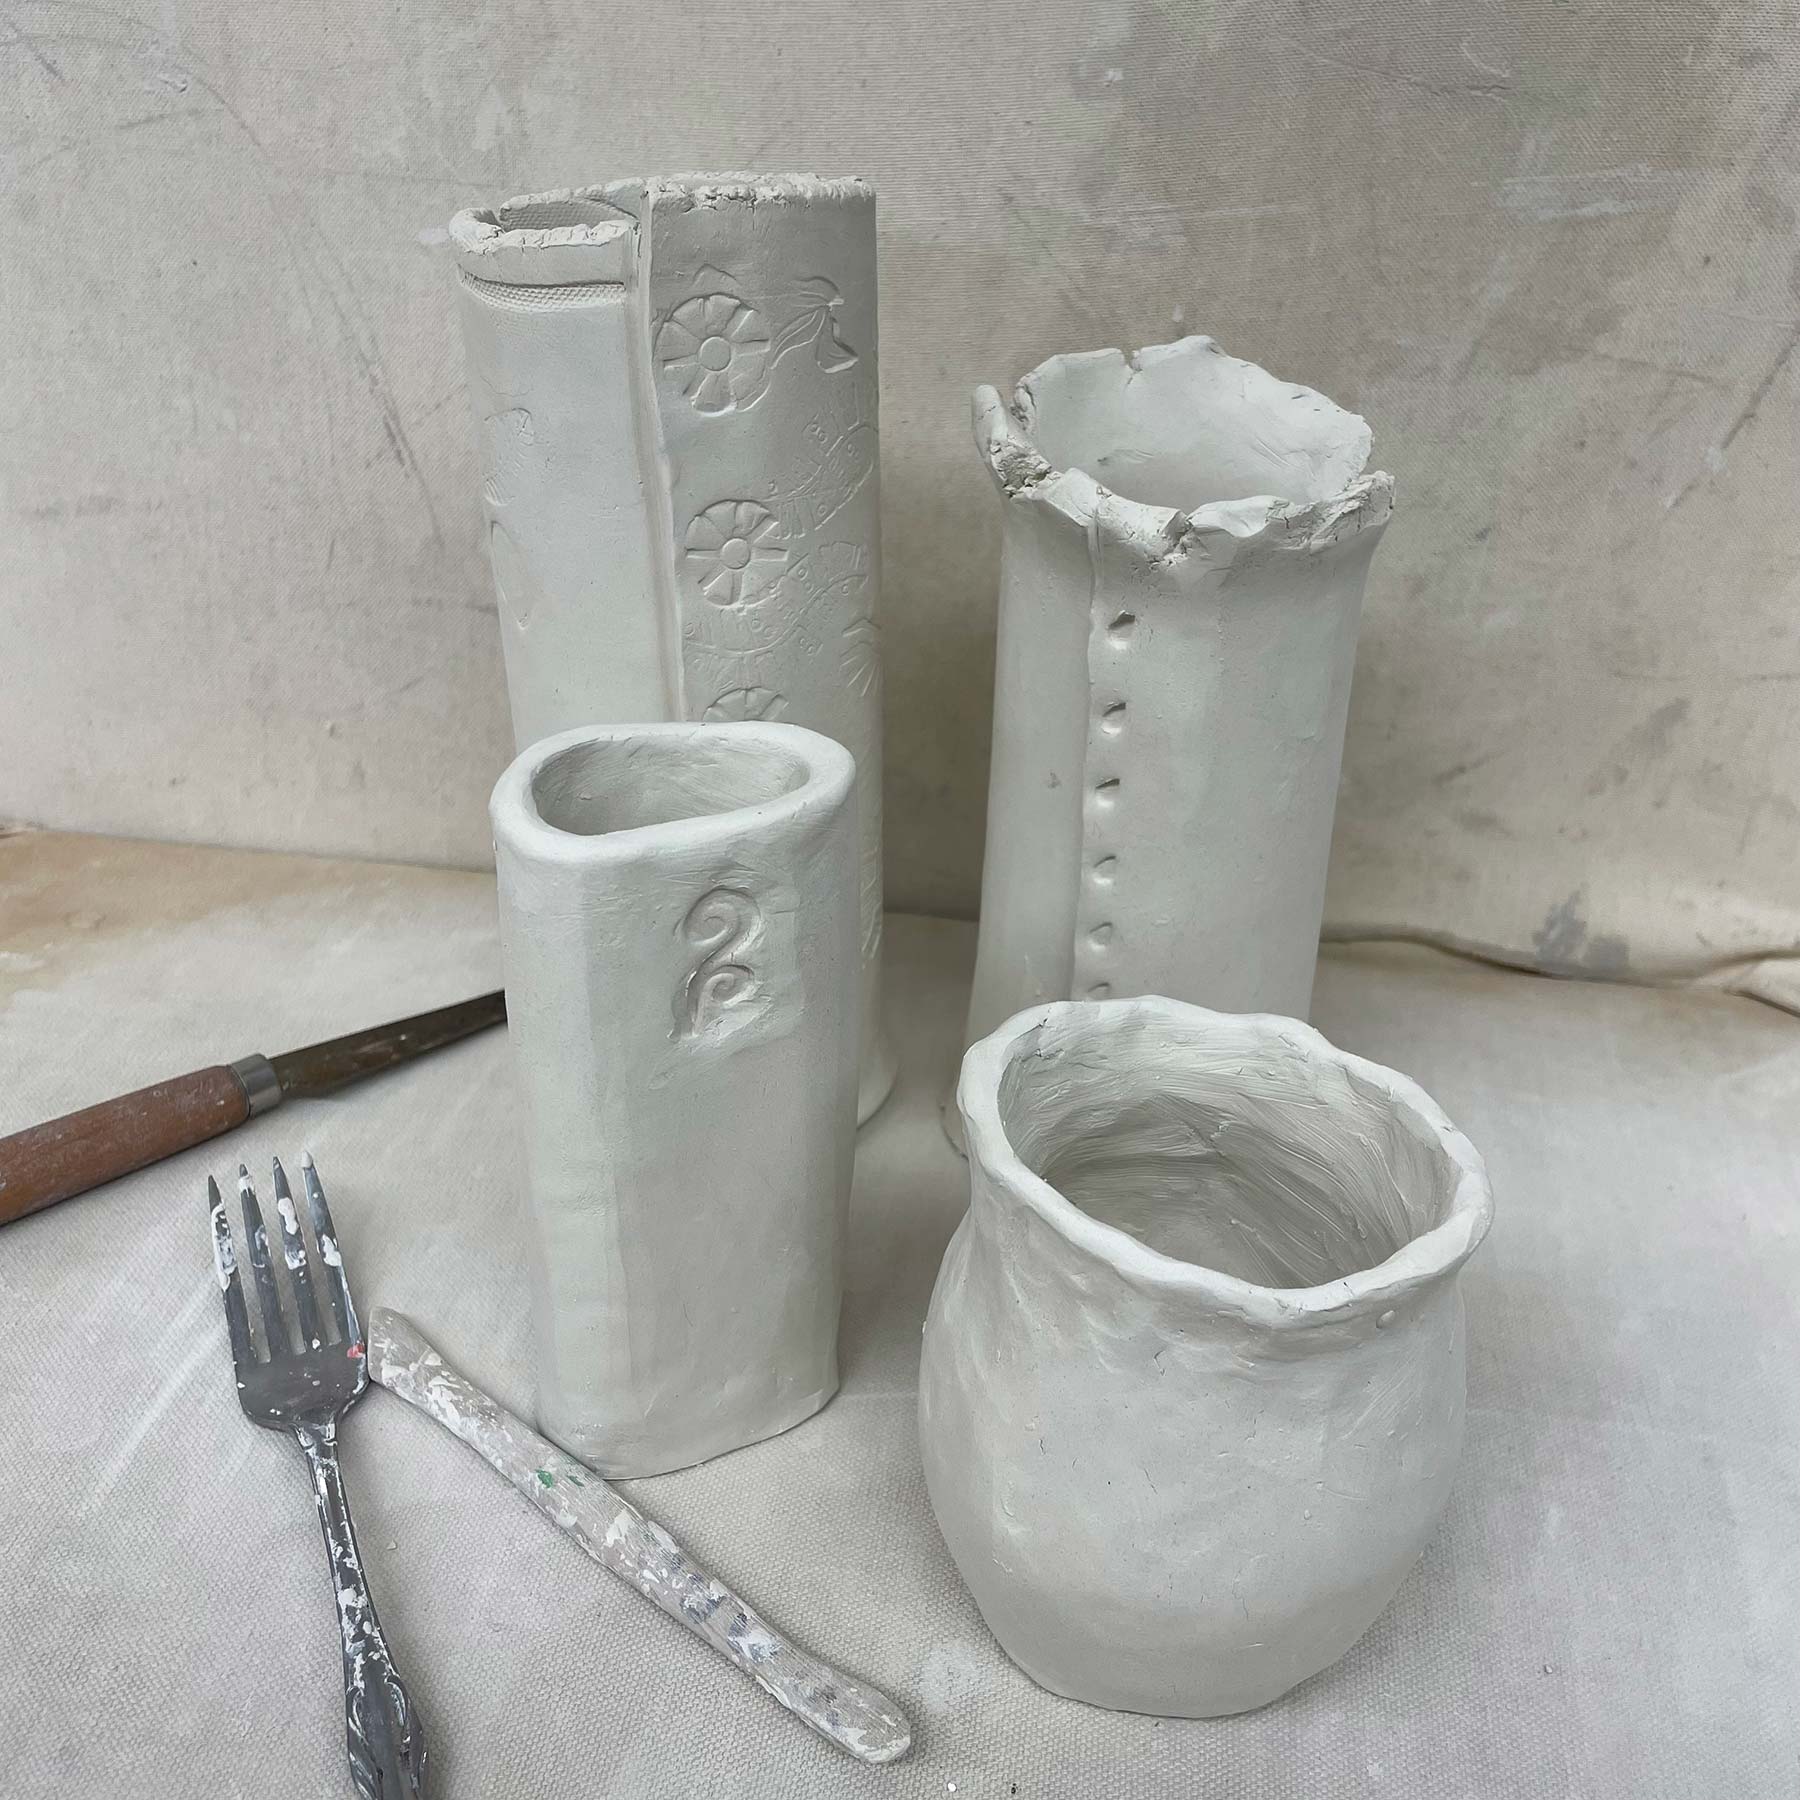 Four ceramic vases arranged from front to back in increasing size, each with a pattern inscribed into them